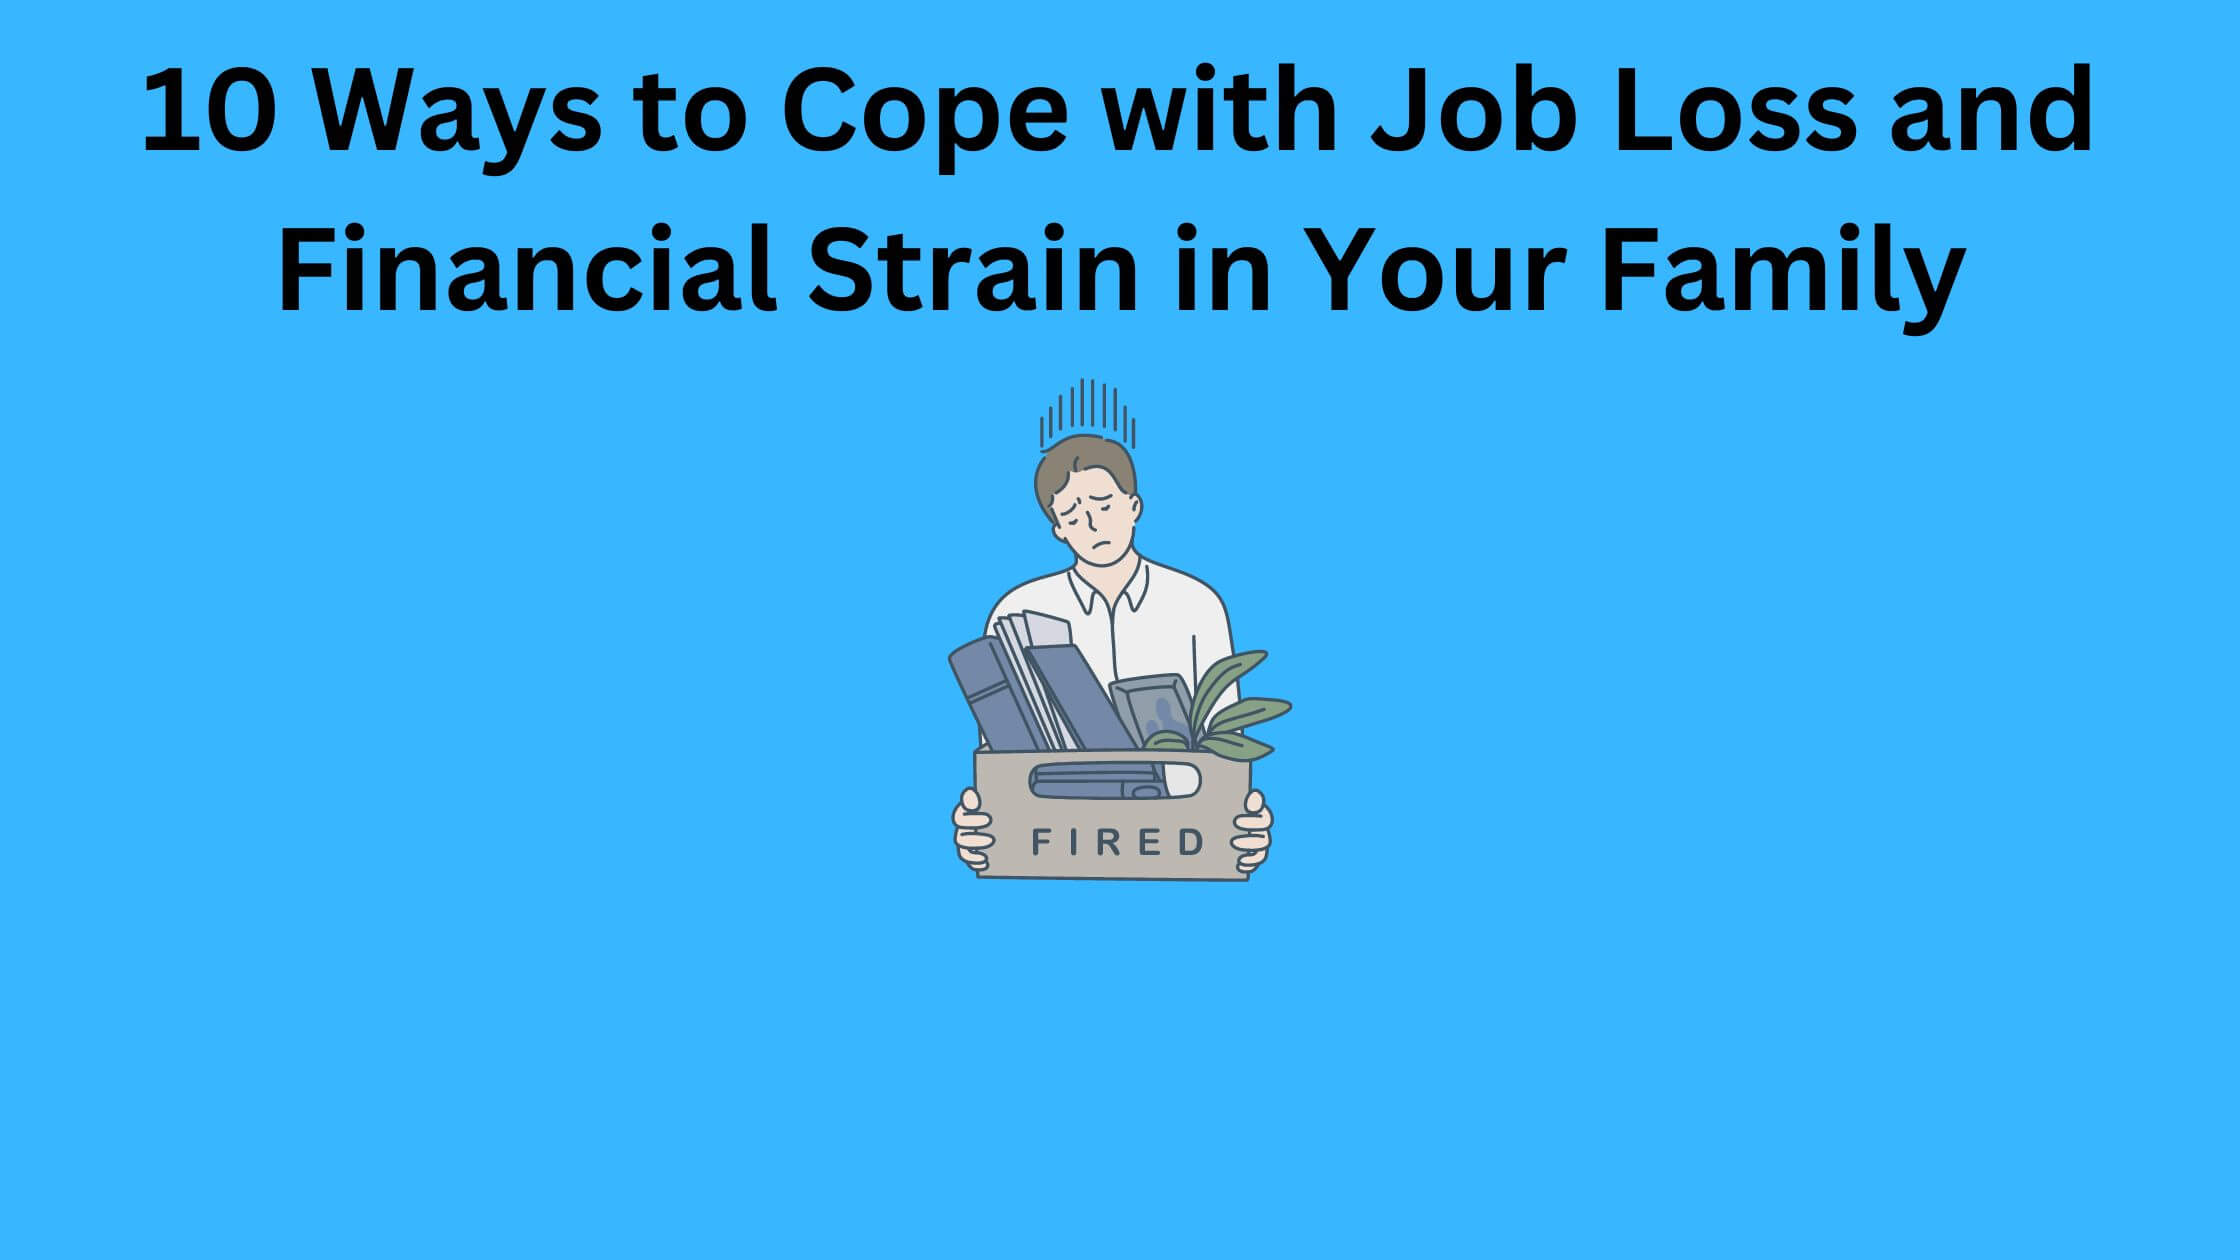 10 Ways to Cope with Job Loss and Financial Strain in Your Family